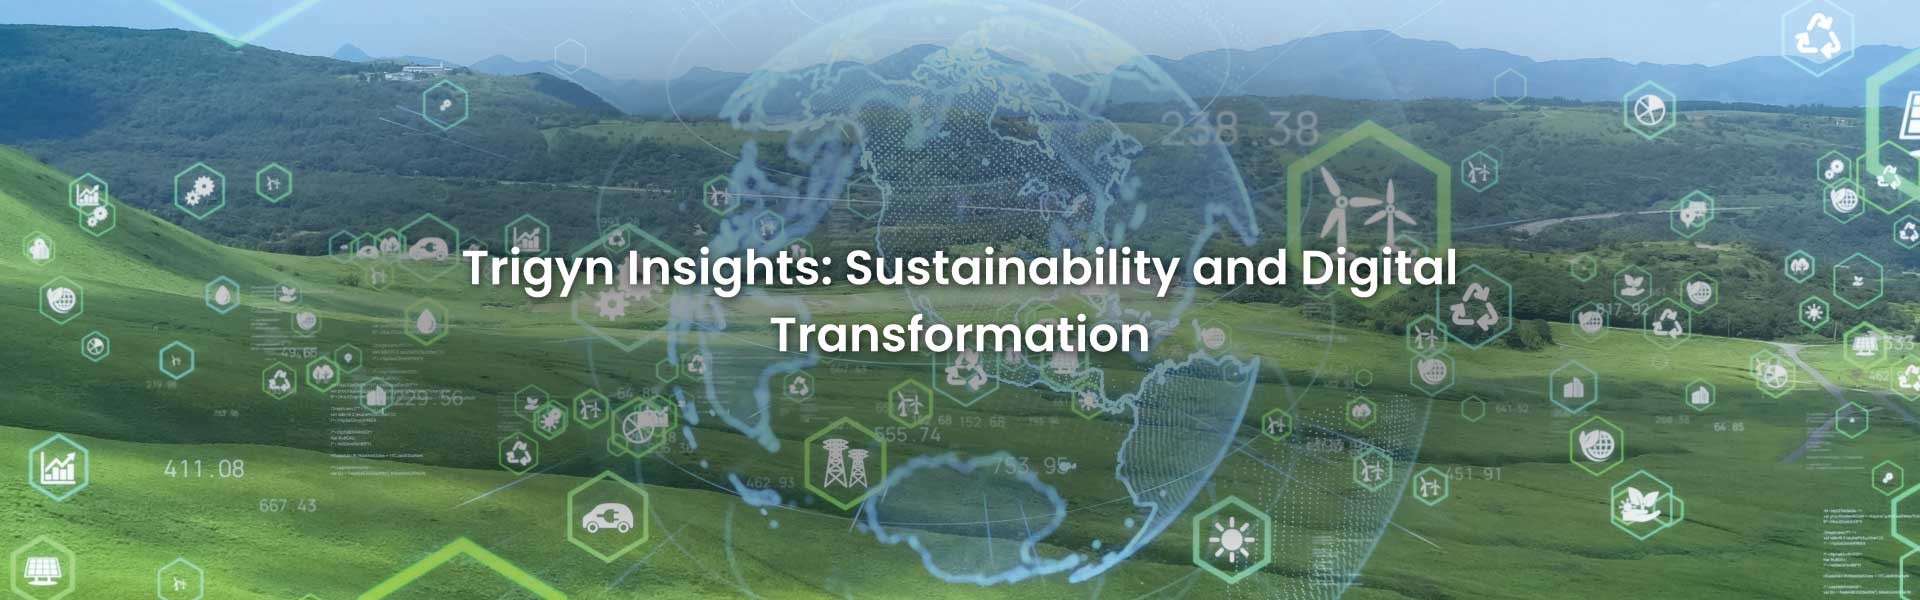 Sustainability and Digital Transformation